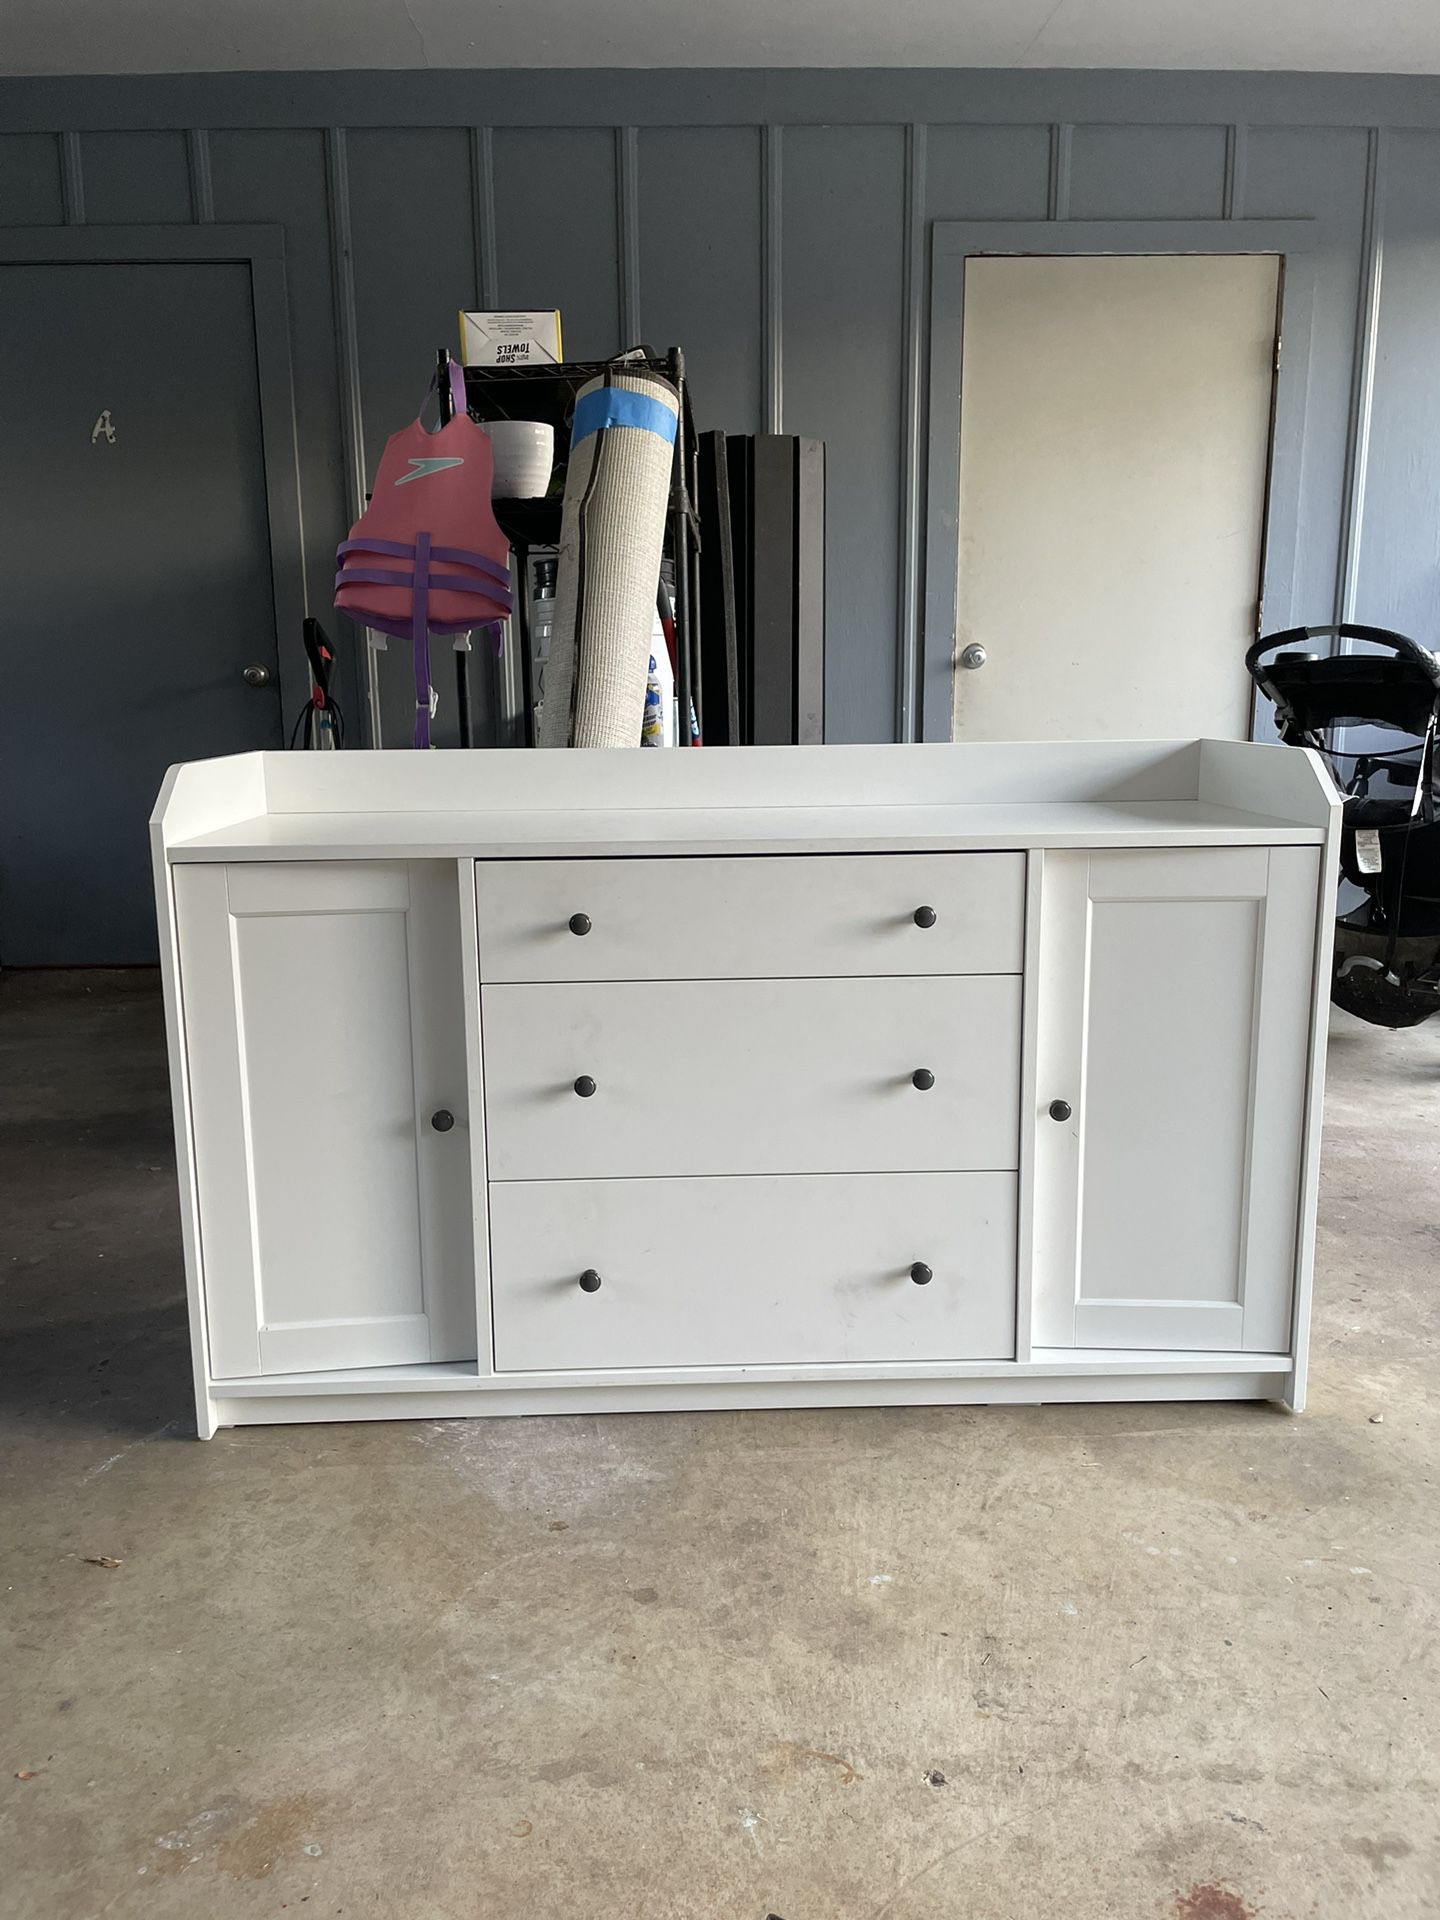 IKEA credenza or Changing Table